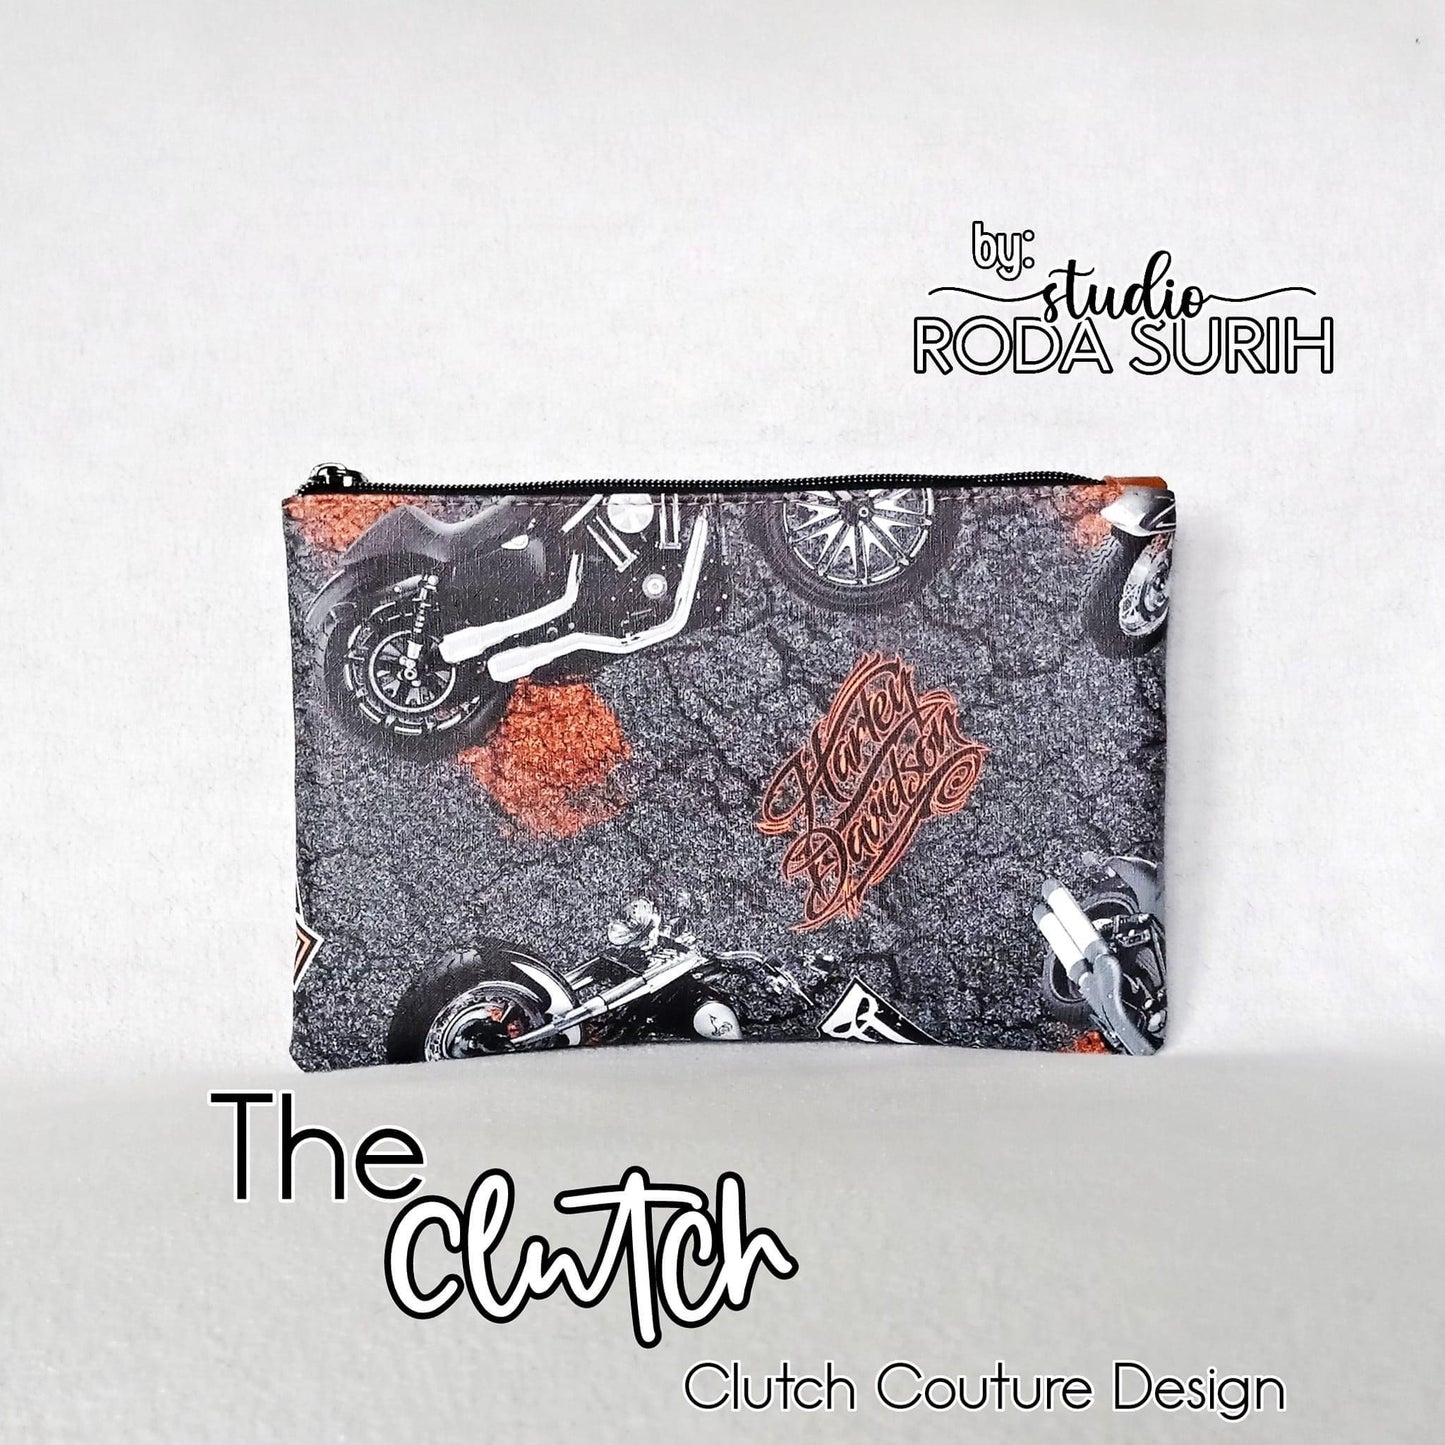 Ears – The Clutch Couture Designs